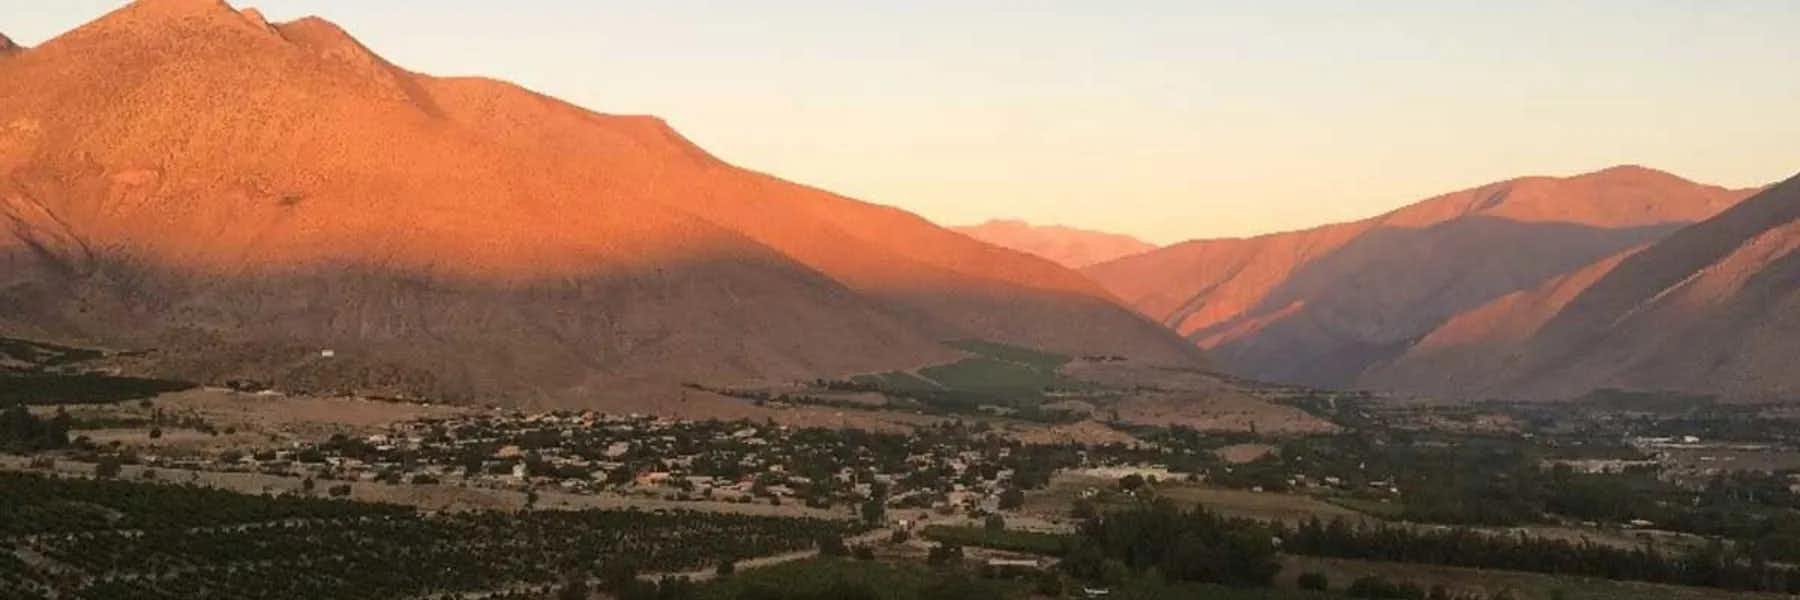 My Week in Valle de Elqui Chile